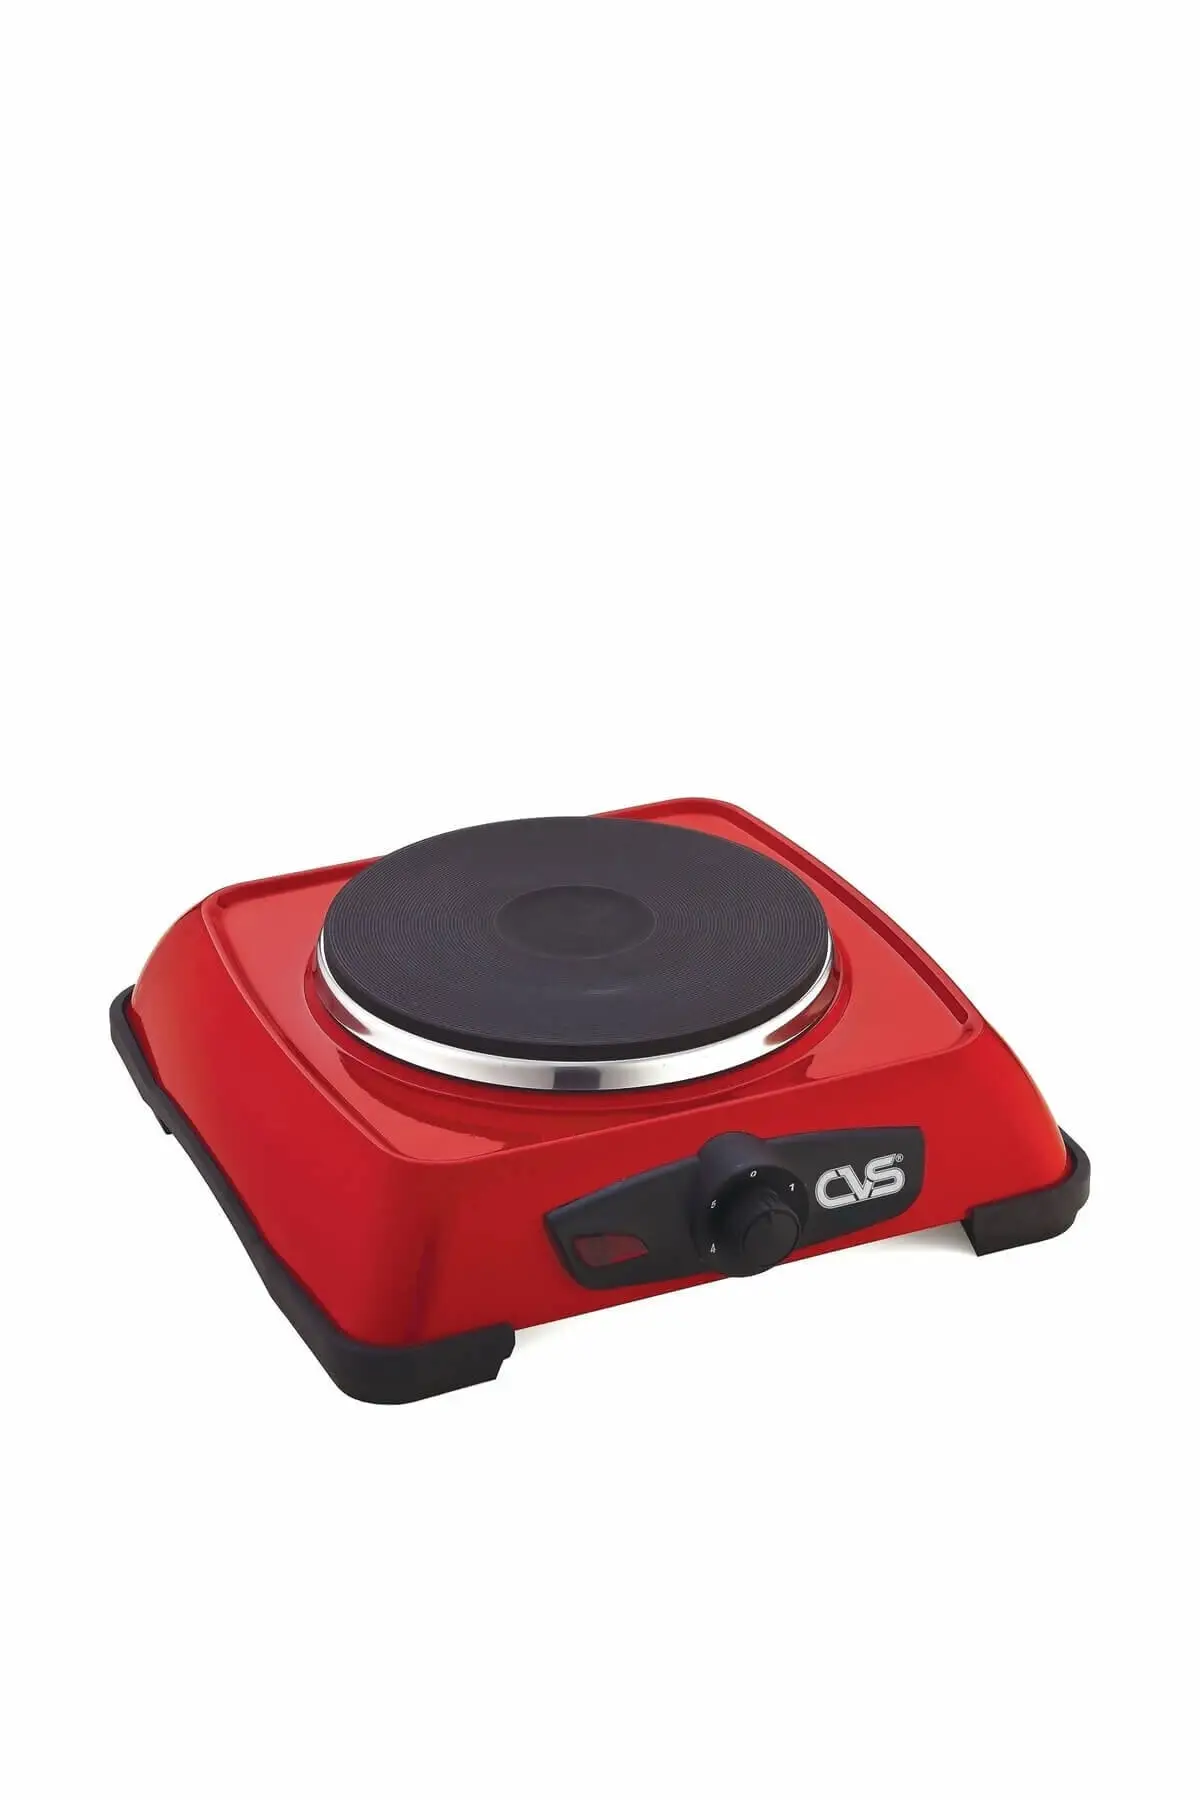 CVS Dn 2400 Cable Single Electric Stove Red